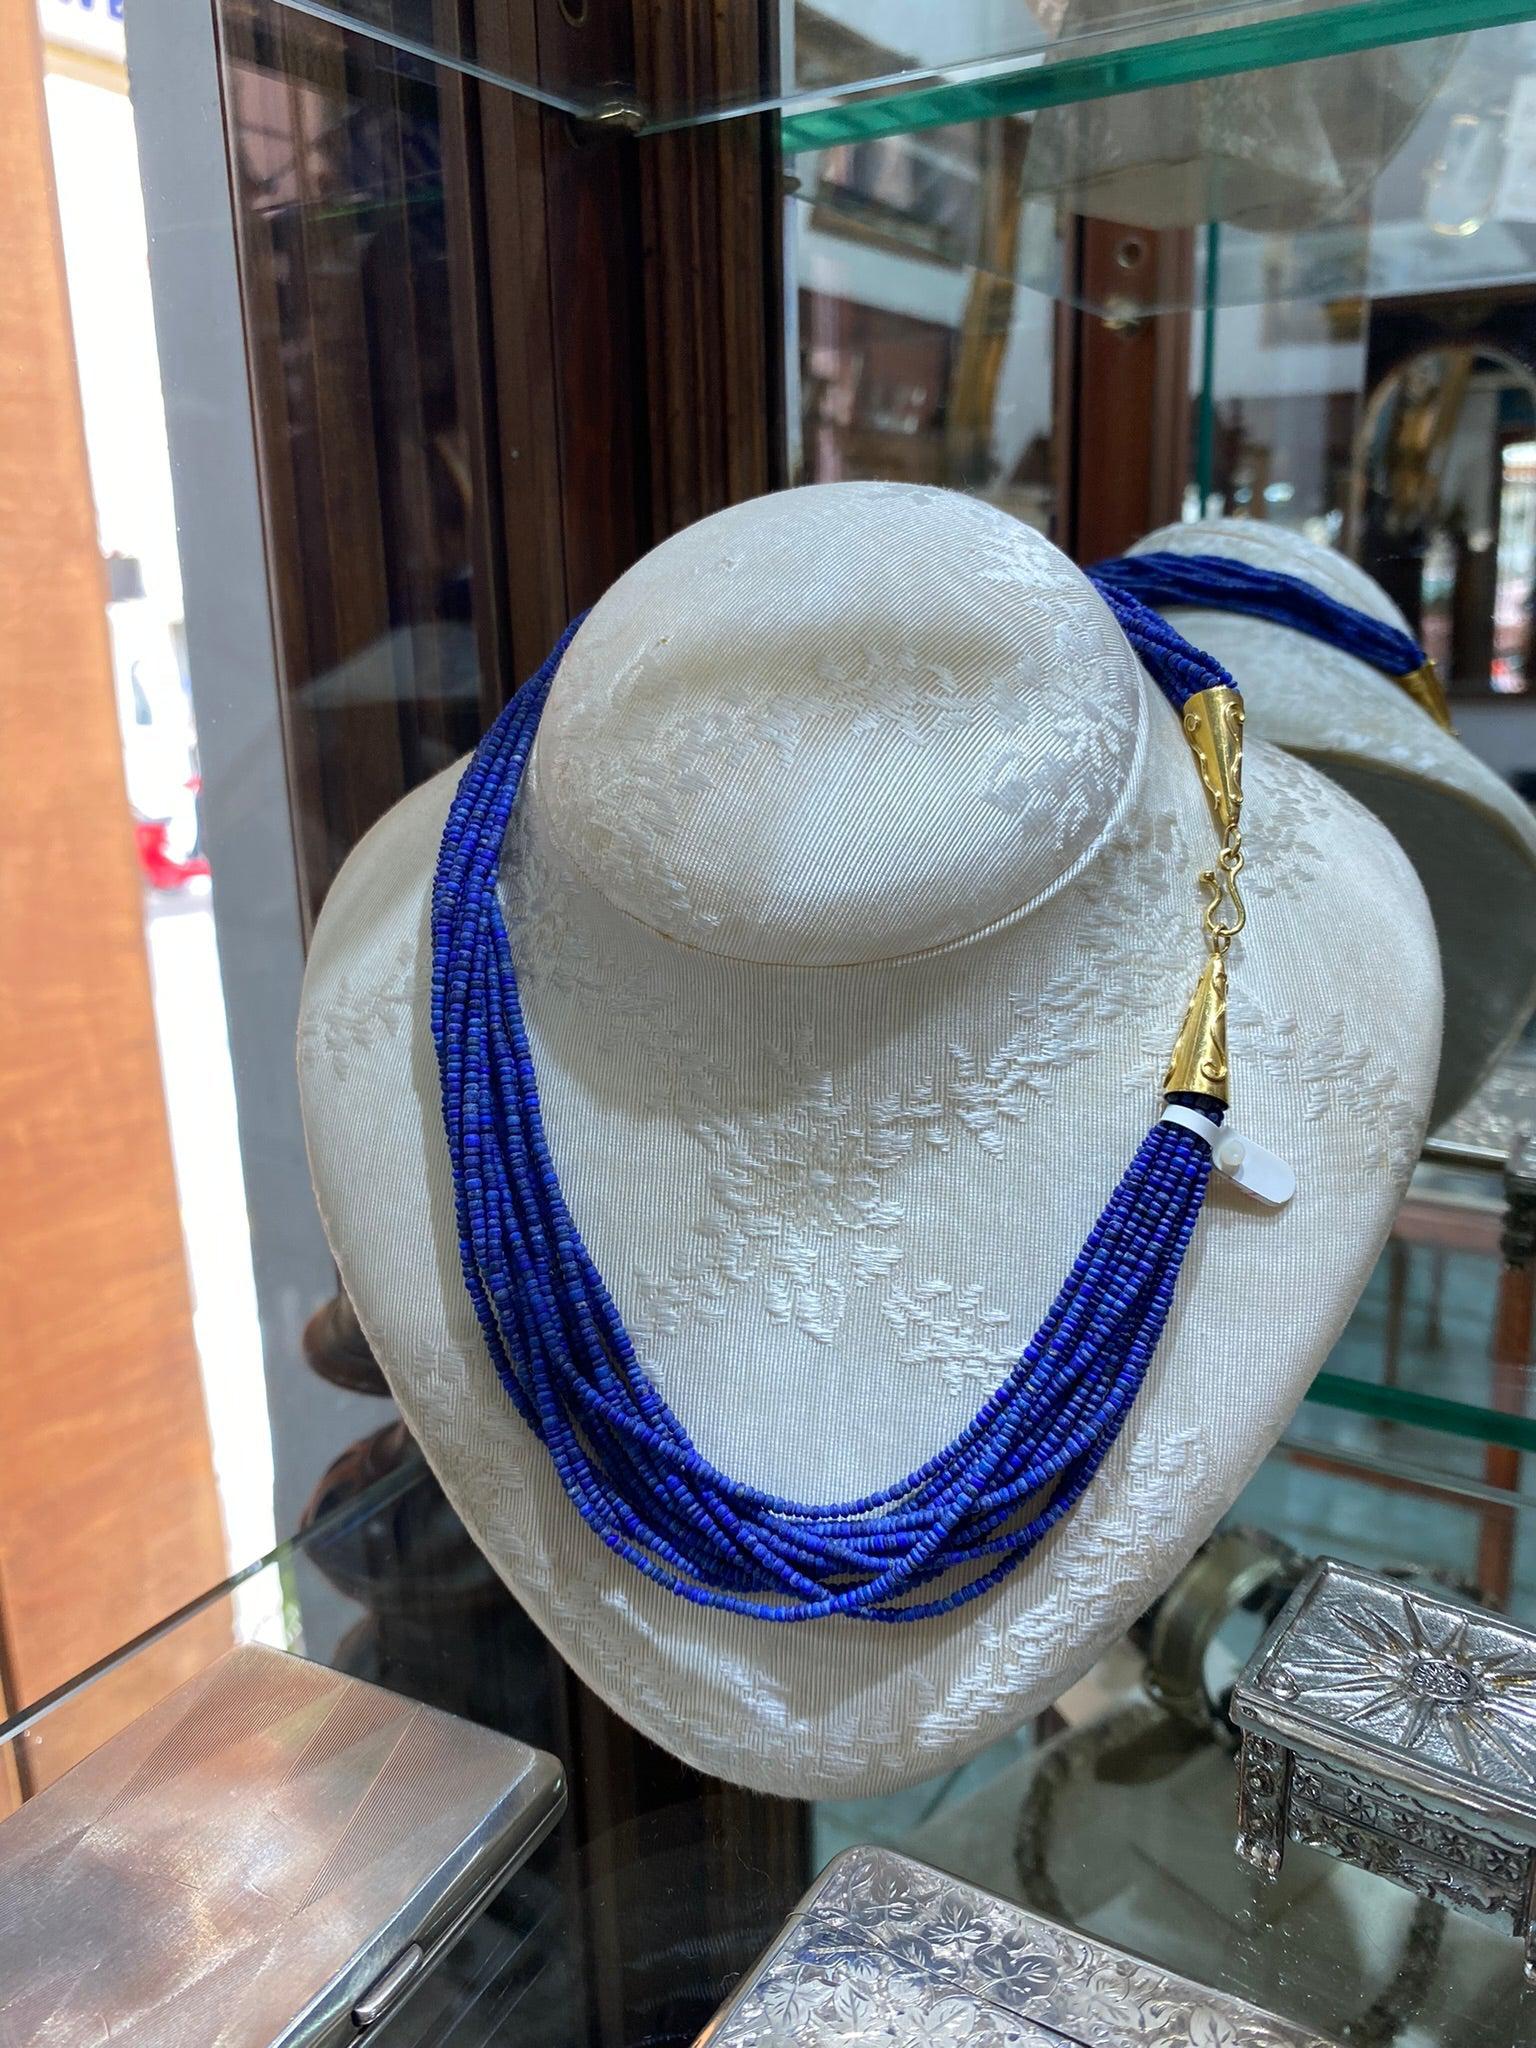 Necklace with Lapis Lazuli & Gold 18k clasp